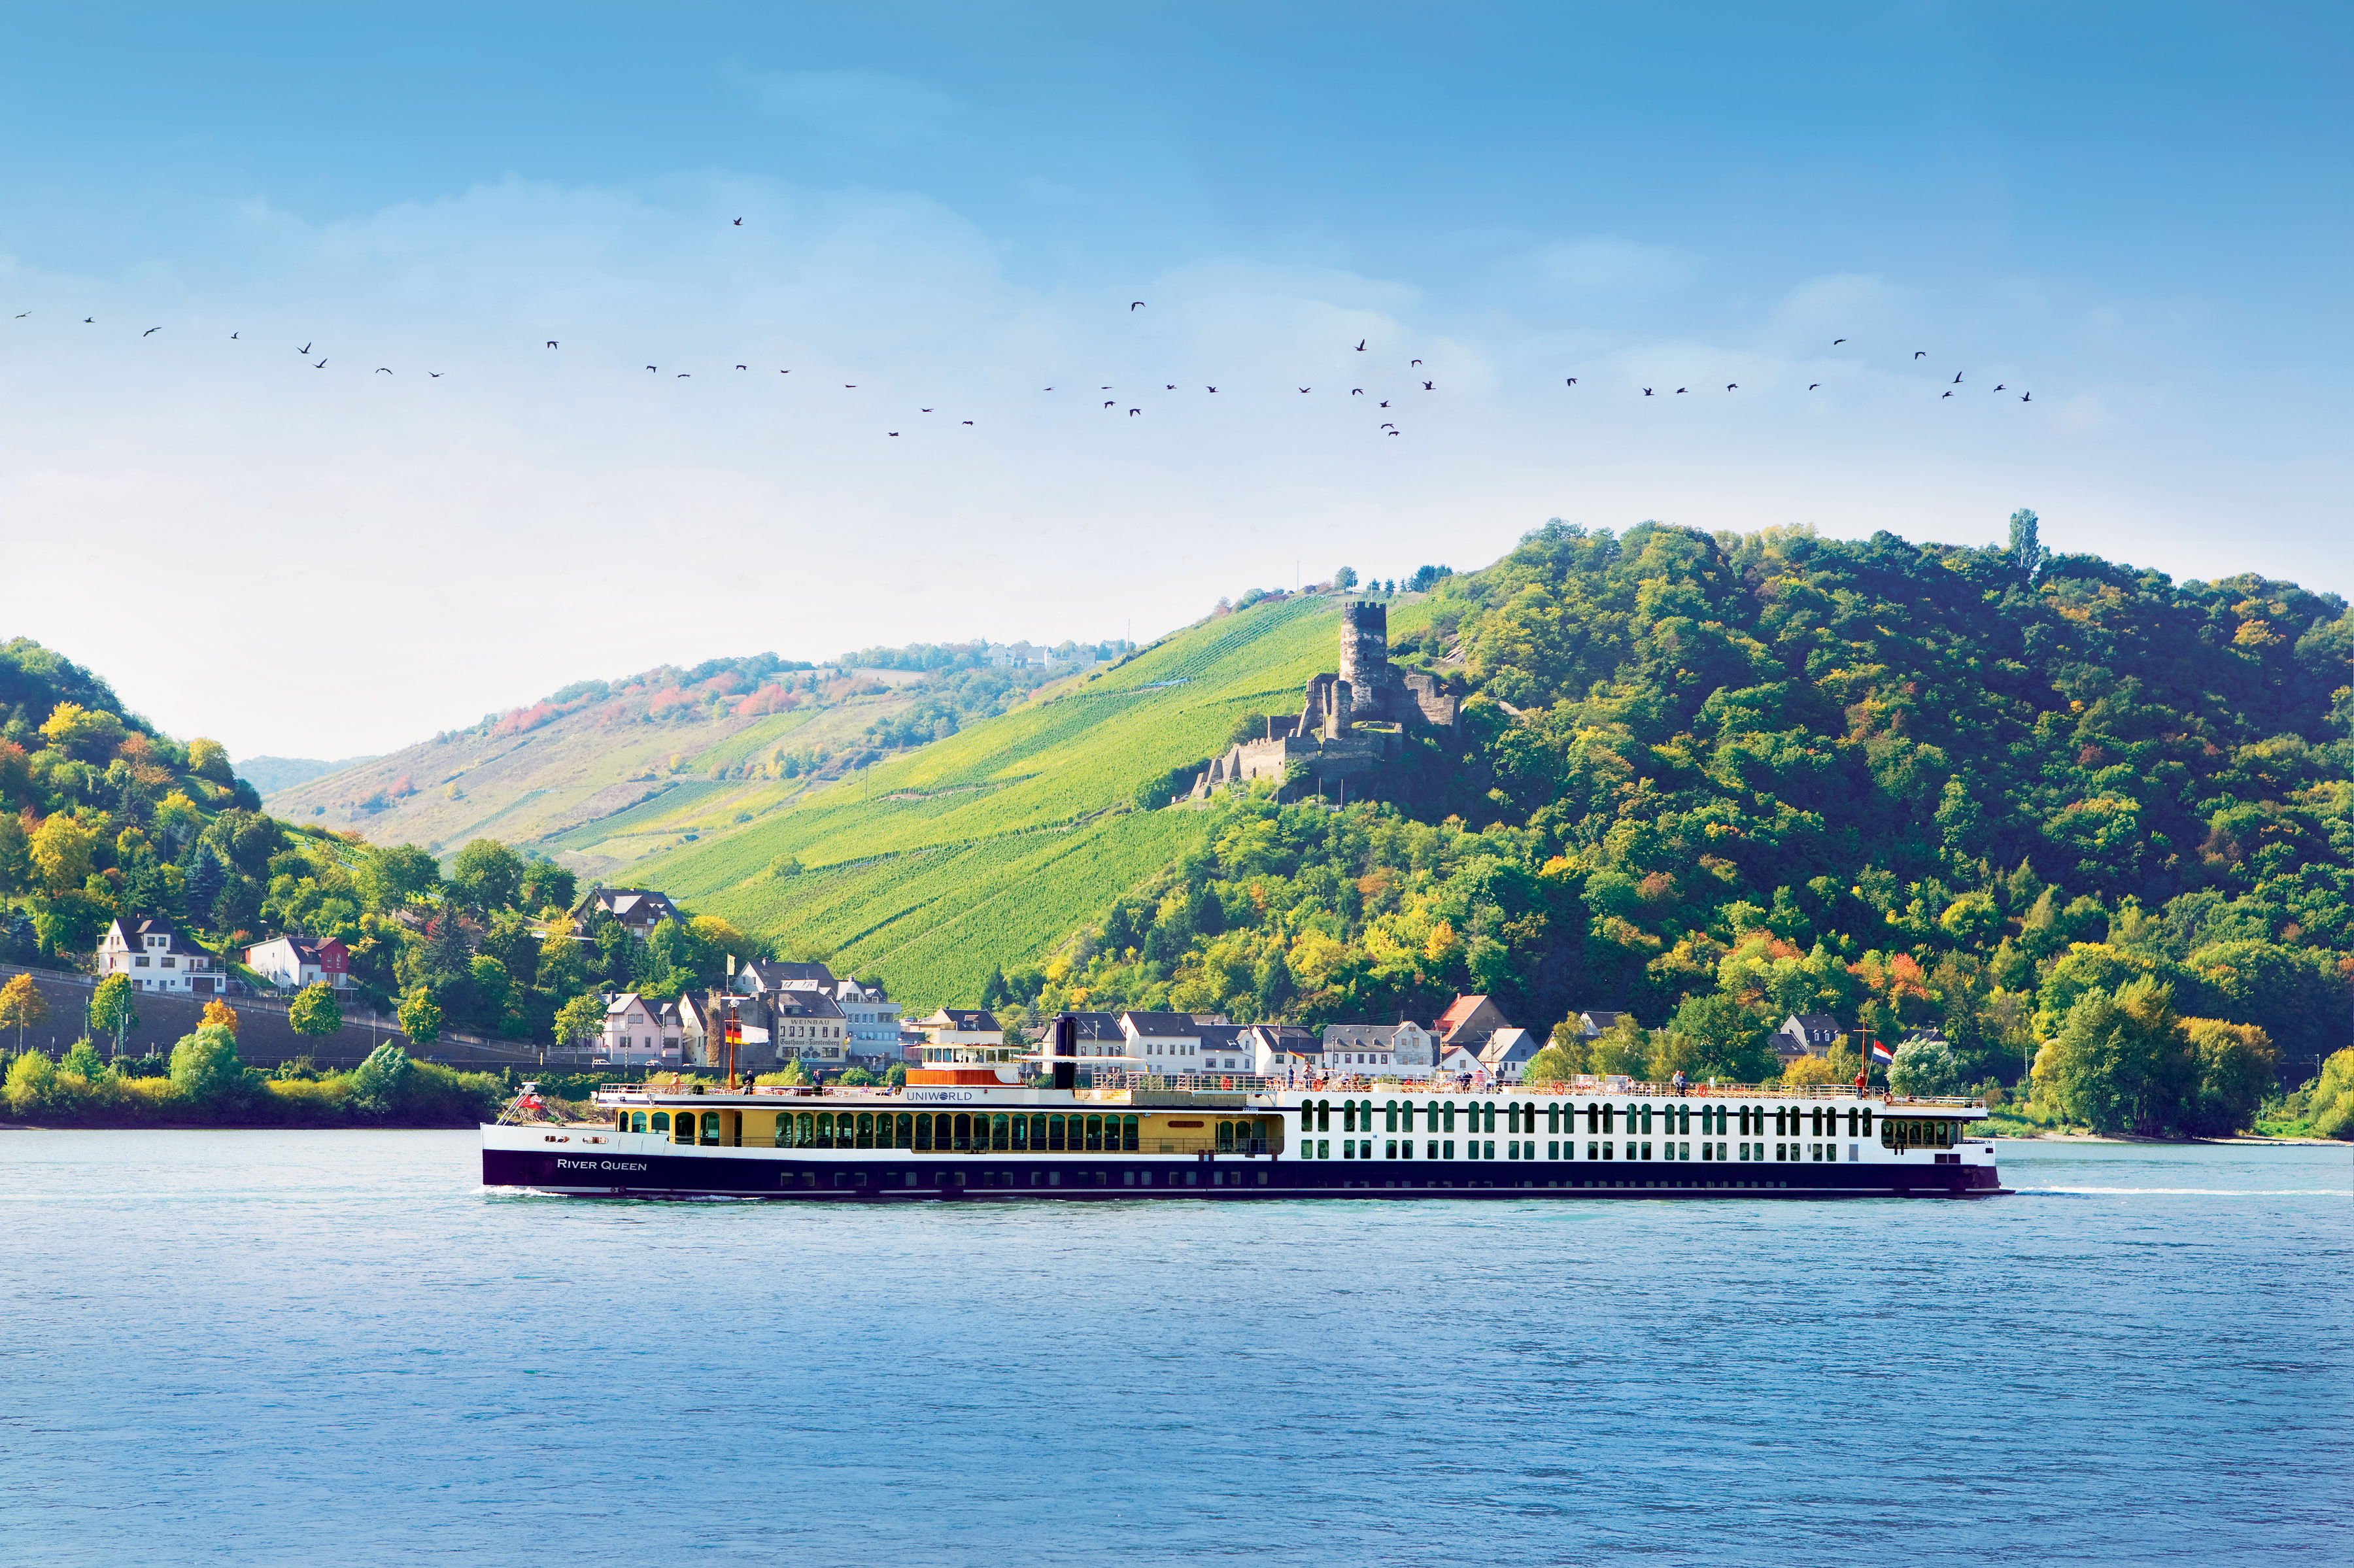 Uniworld - River Queen on the Rhine